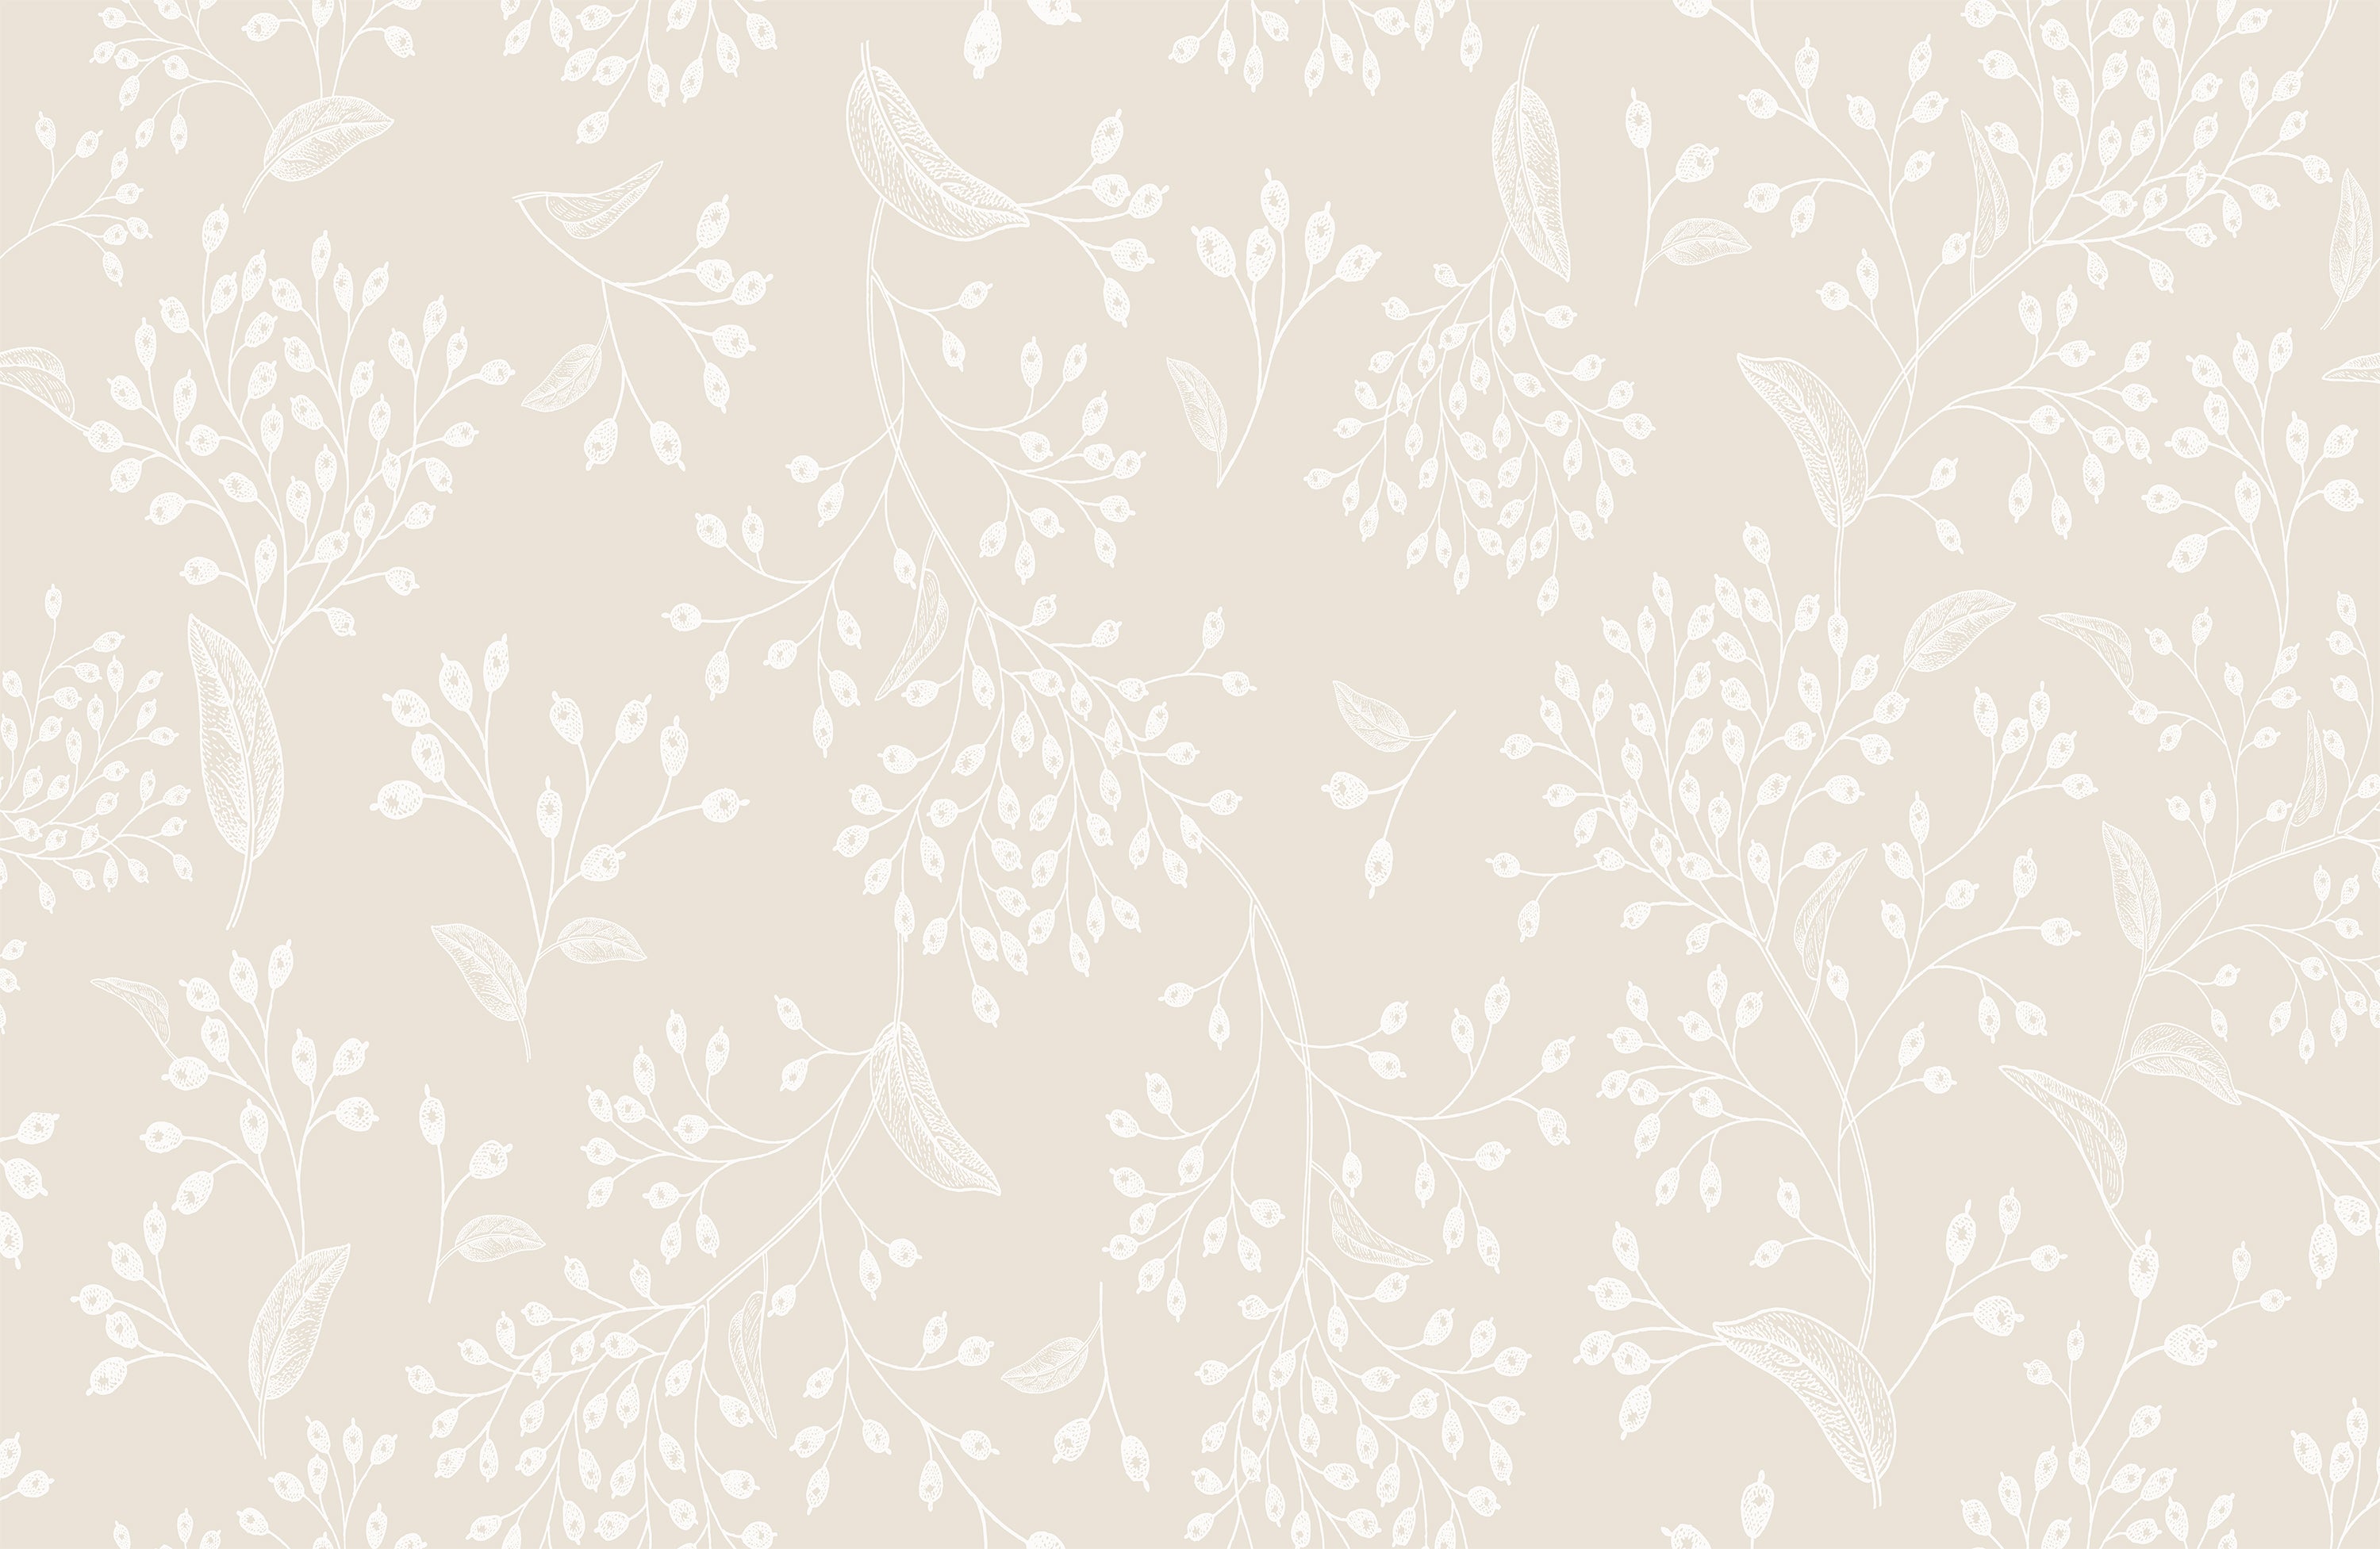 Close-up view of the Botanical Whisper Wallpaper, highlighting its intricate design of white botanical motifs on a beige background. The detailed artwork includes various forms of flora, with leaves and buds intertwined in a delicate, flowing arrangement, ideal for adding a touch of sophistication to any space